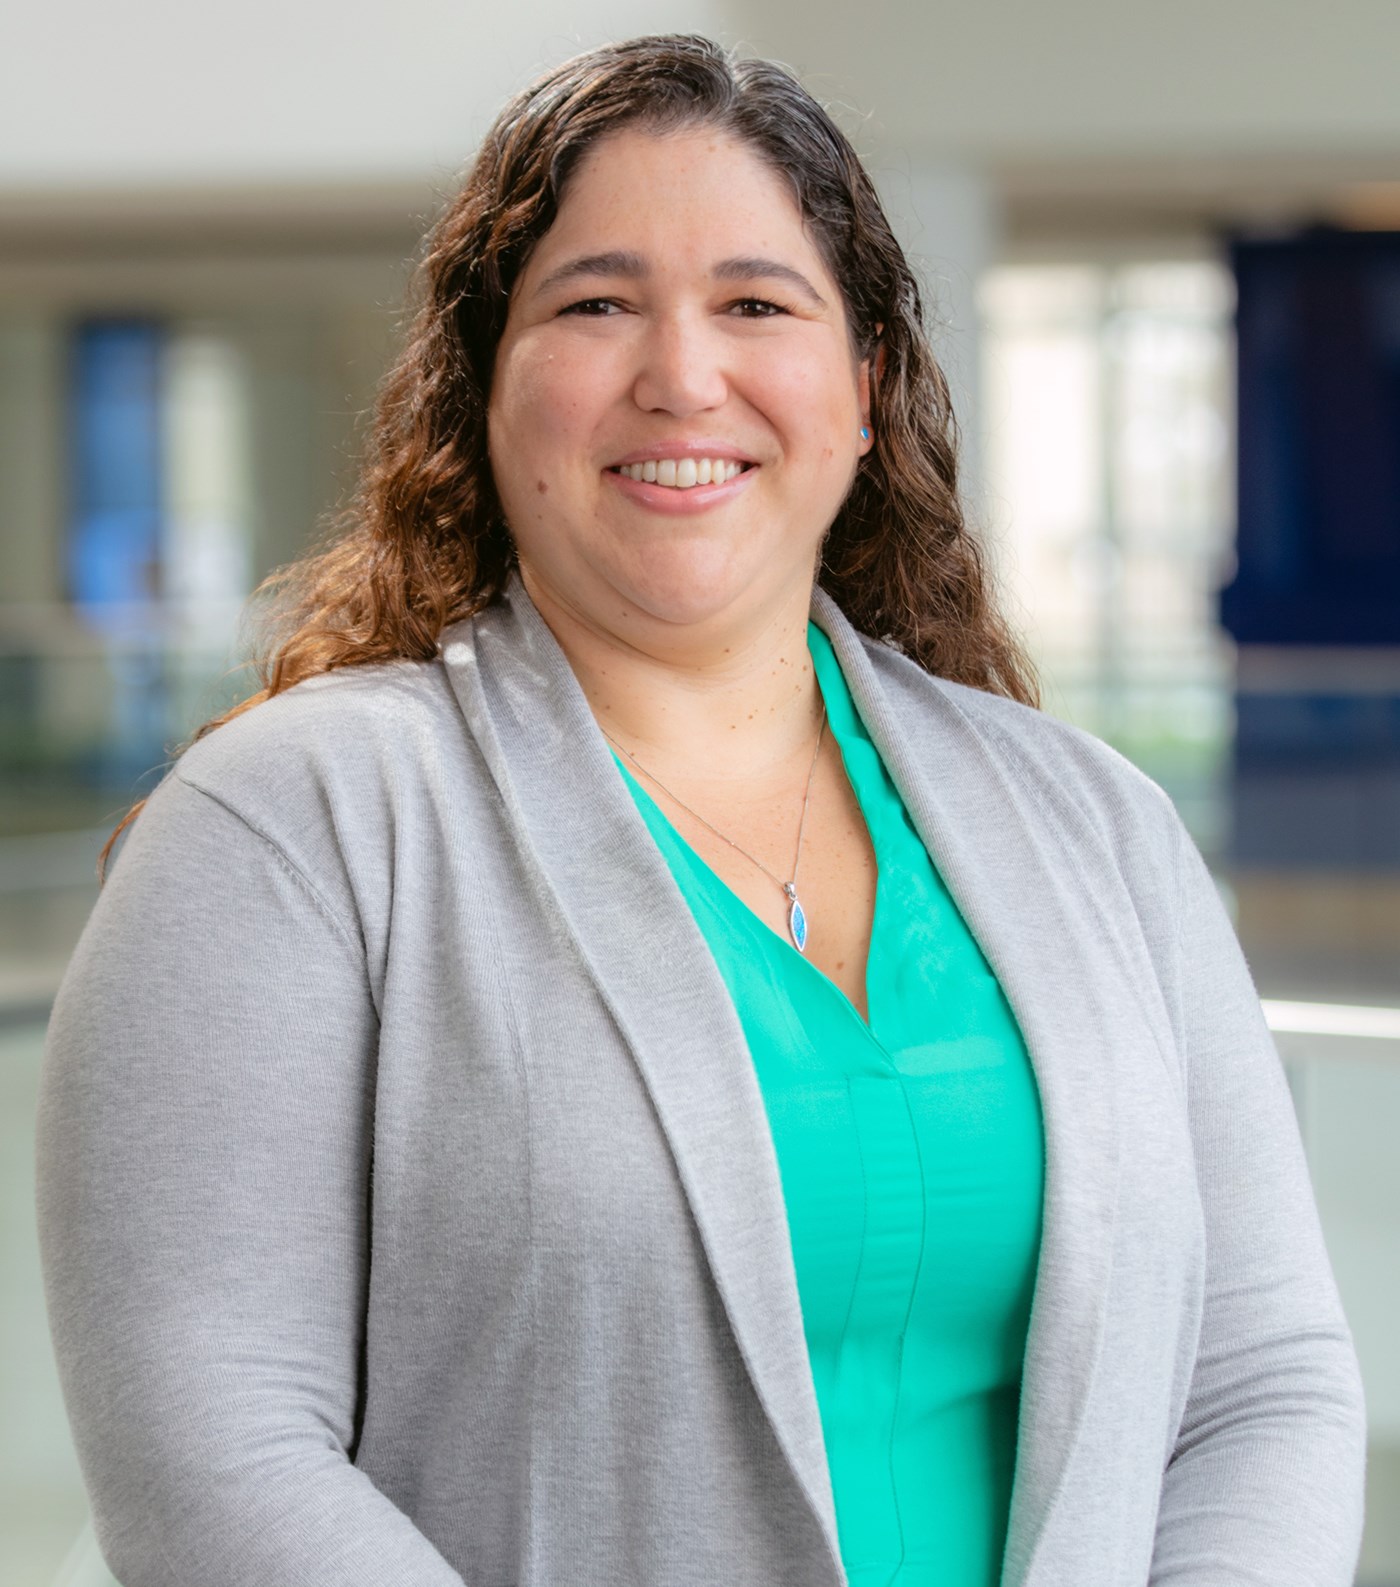 Maru Cabrera is an Assistant Professor in the Computer Science Department at UMass Lowell.